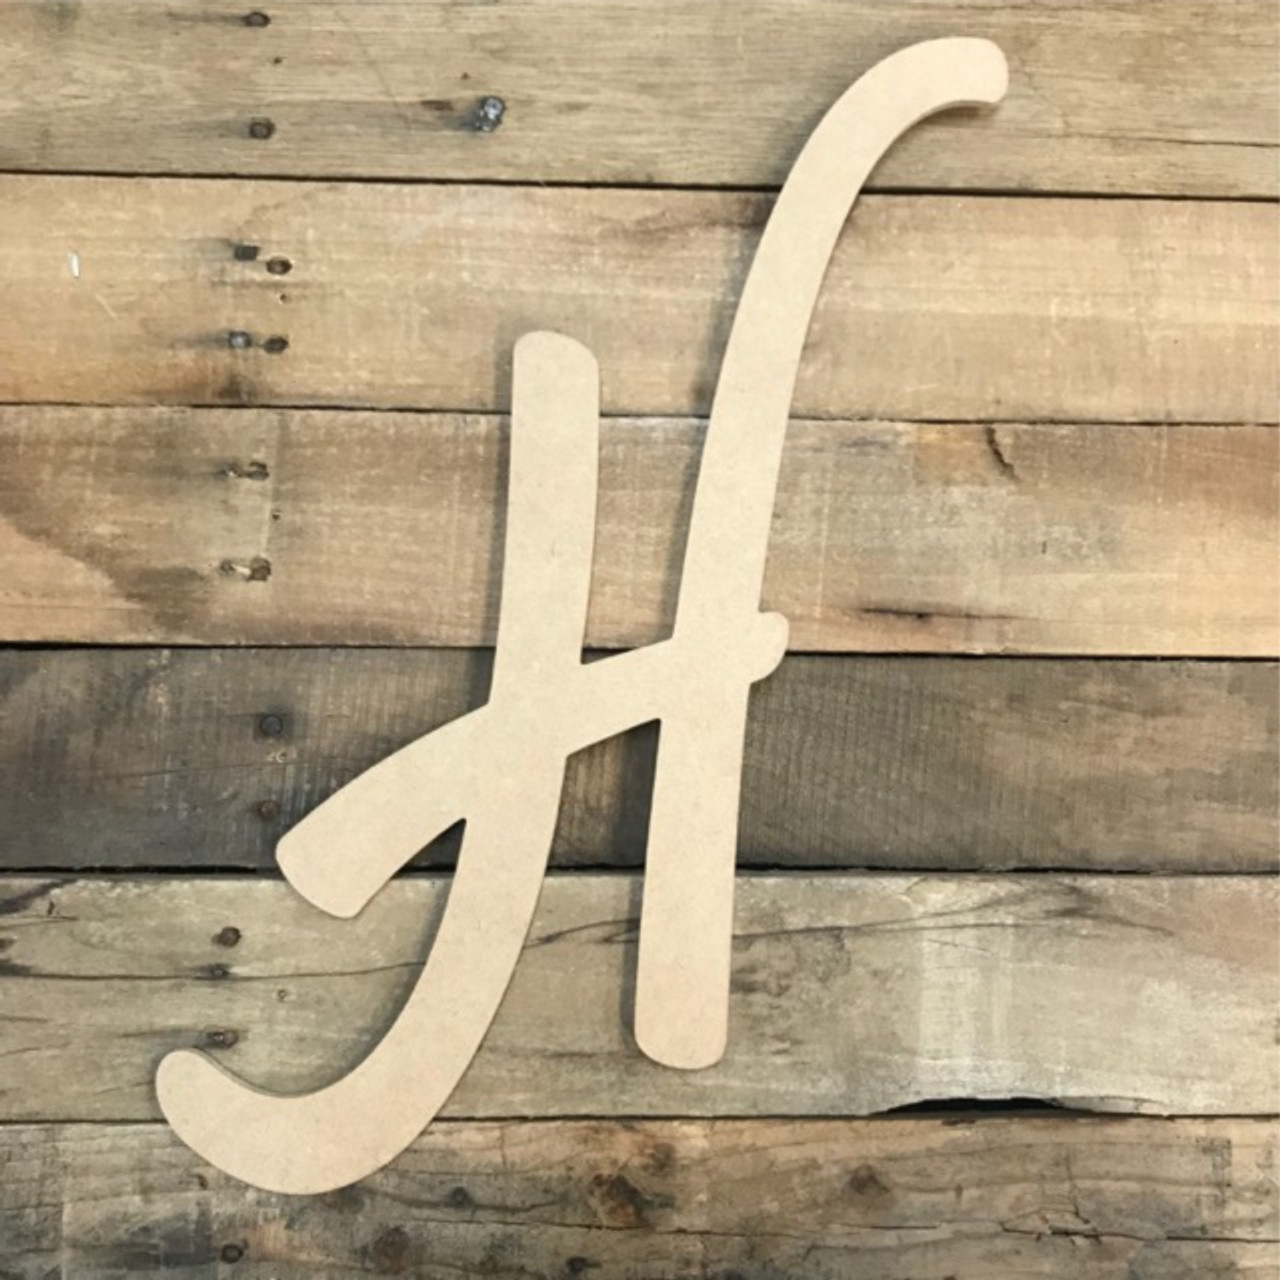 8'' Inch Tall Wood Letters from 1/2 Plywood